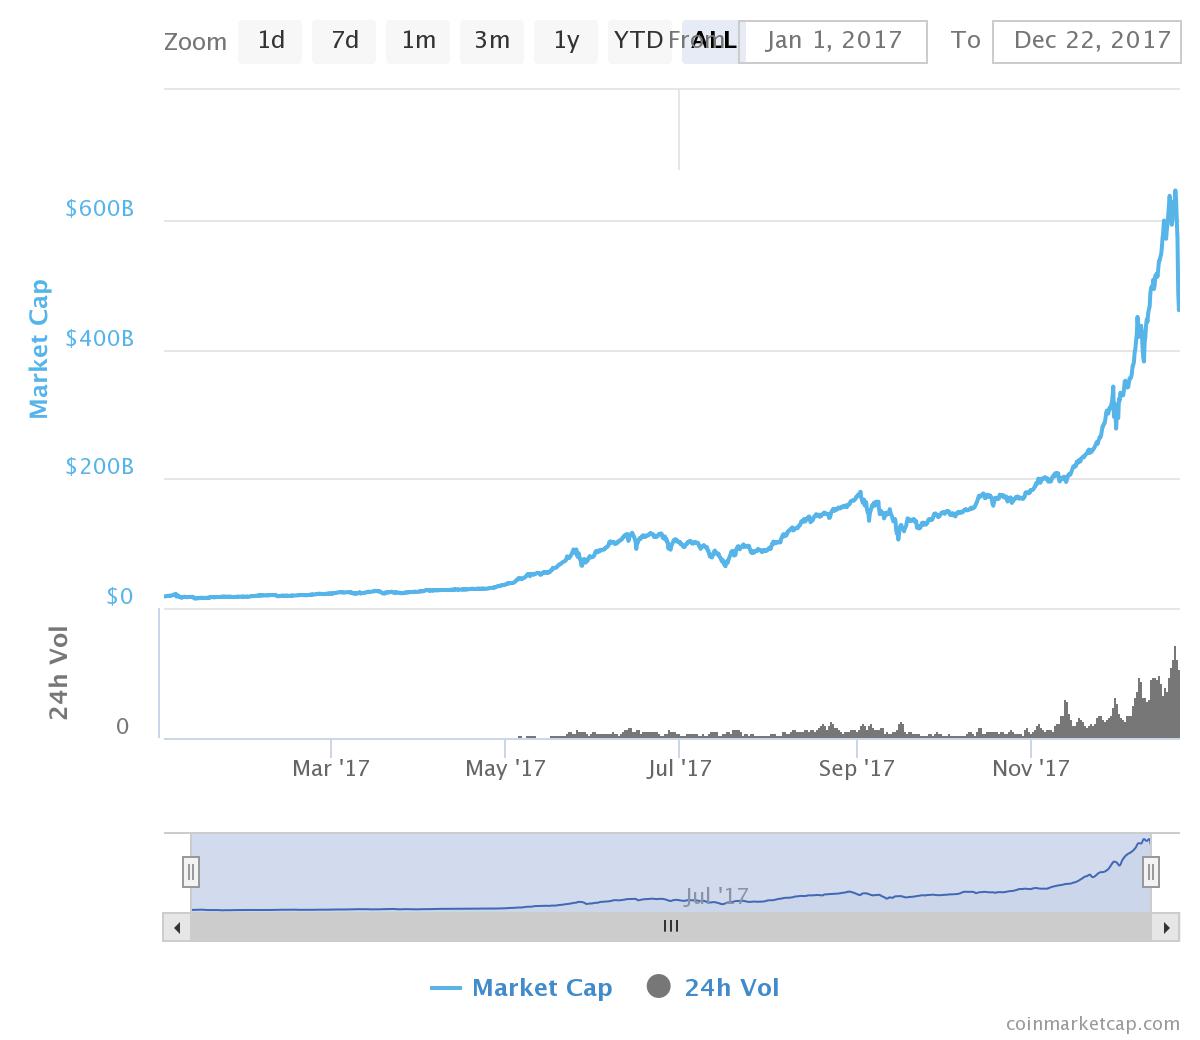 The entire 2017 market cap growth of the entire crypto sector.